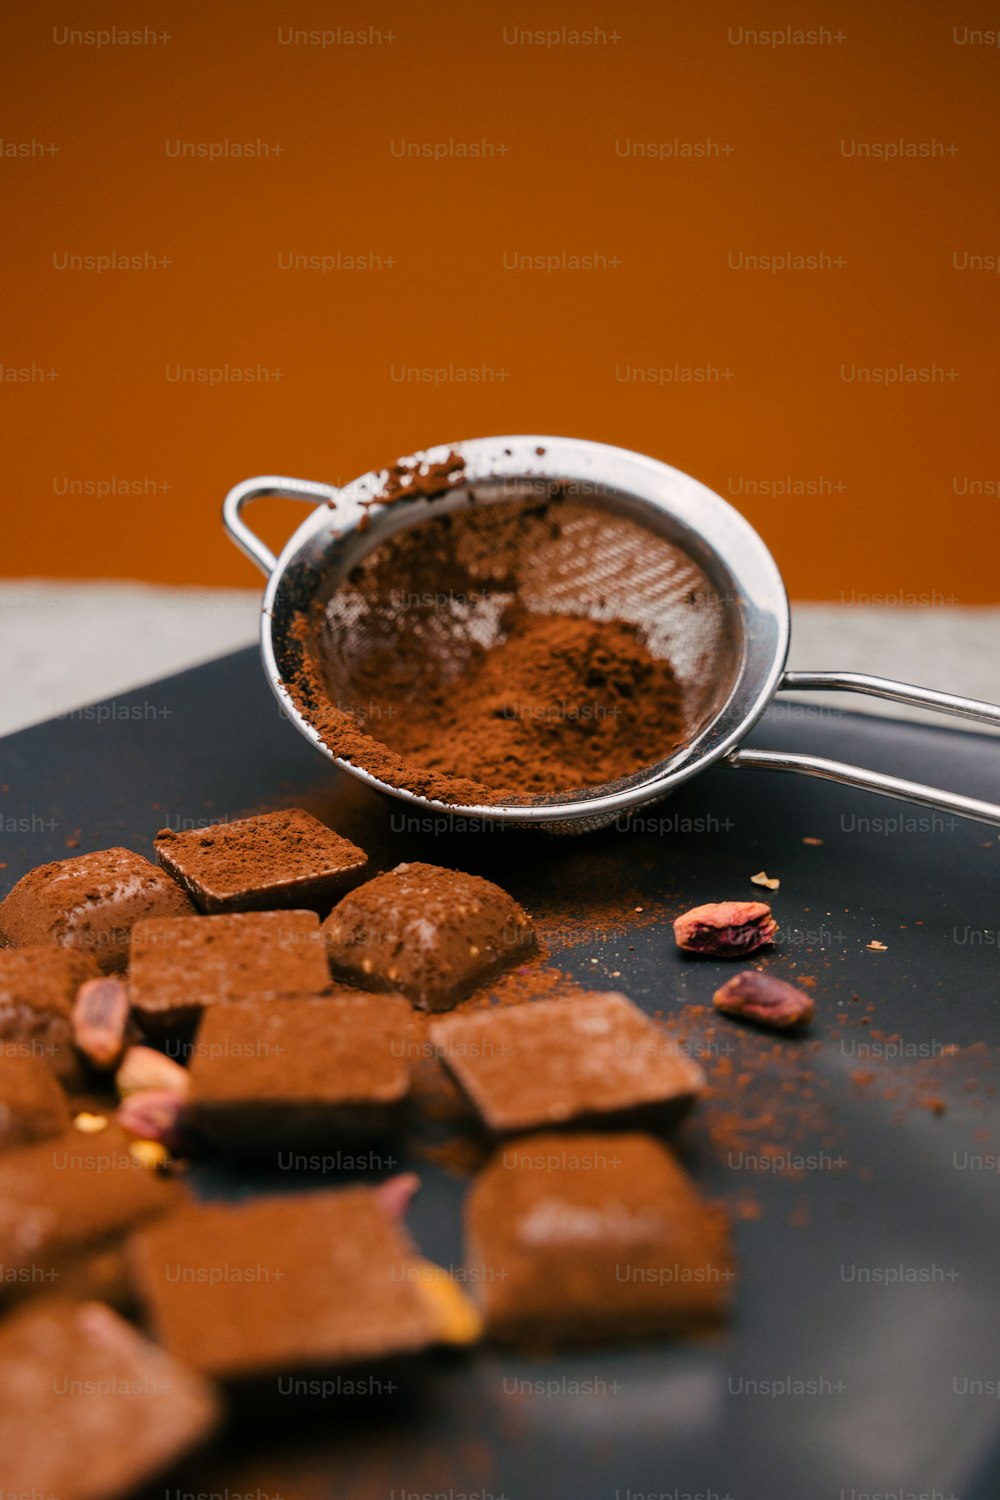 a metal bowl filled with chocolate pieces next to a scoop of cocoa